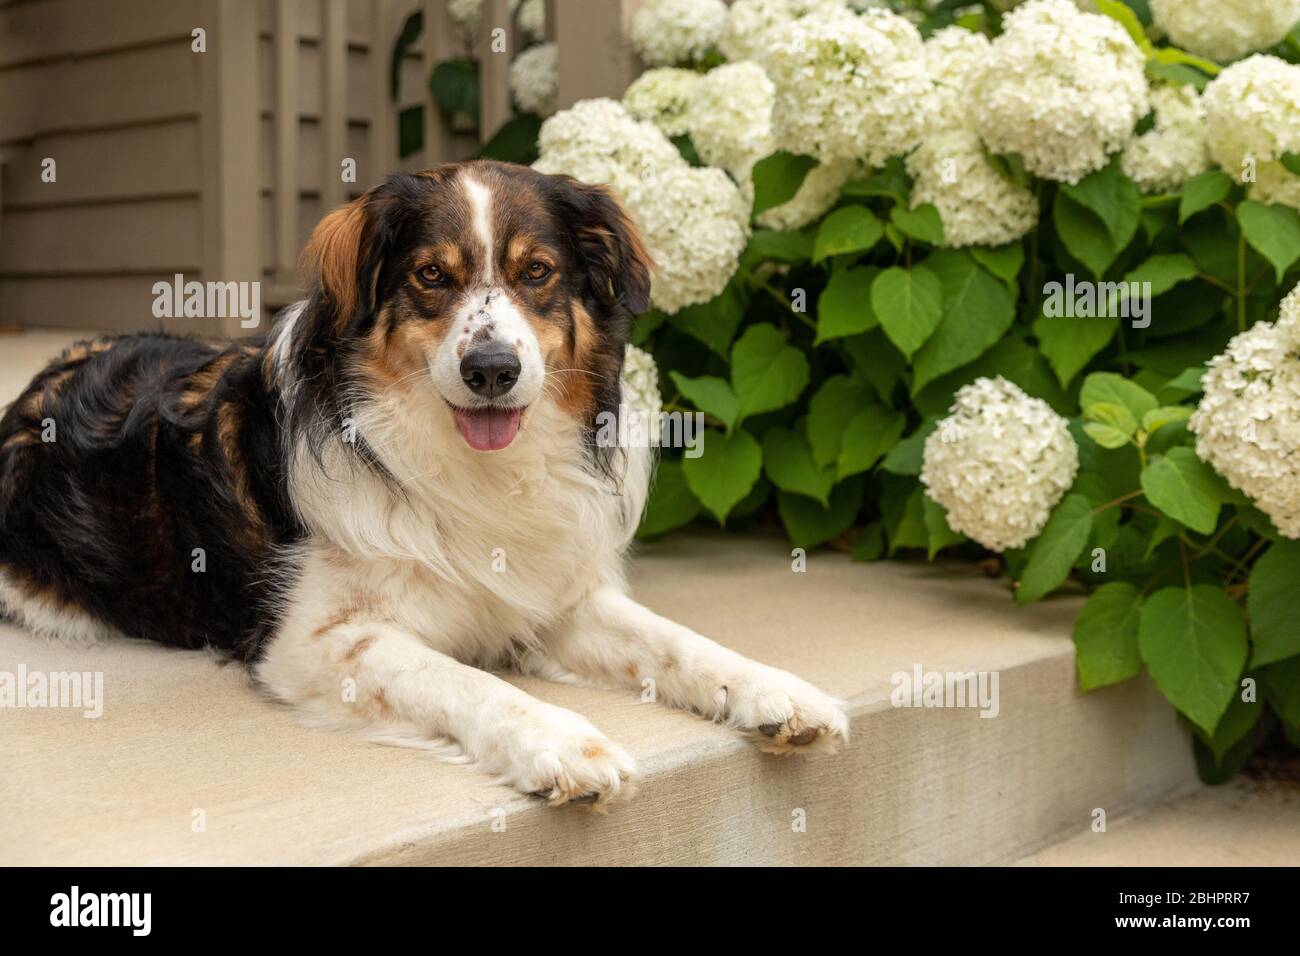 An English Shepherd on a front porch in summer Stock Photo